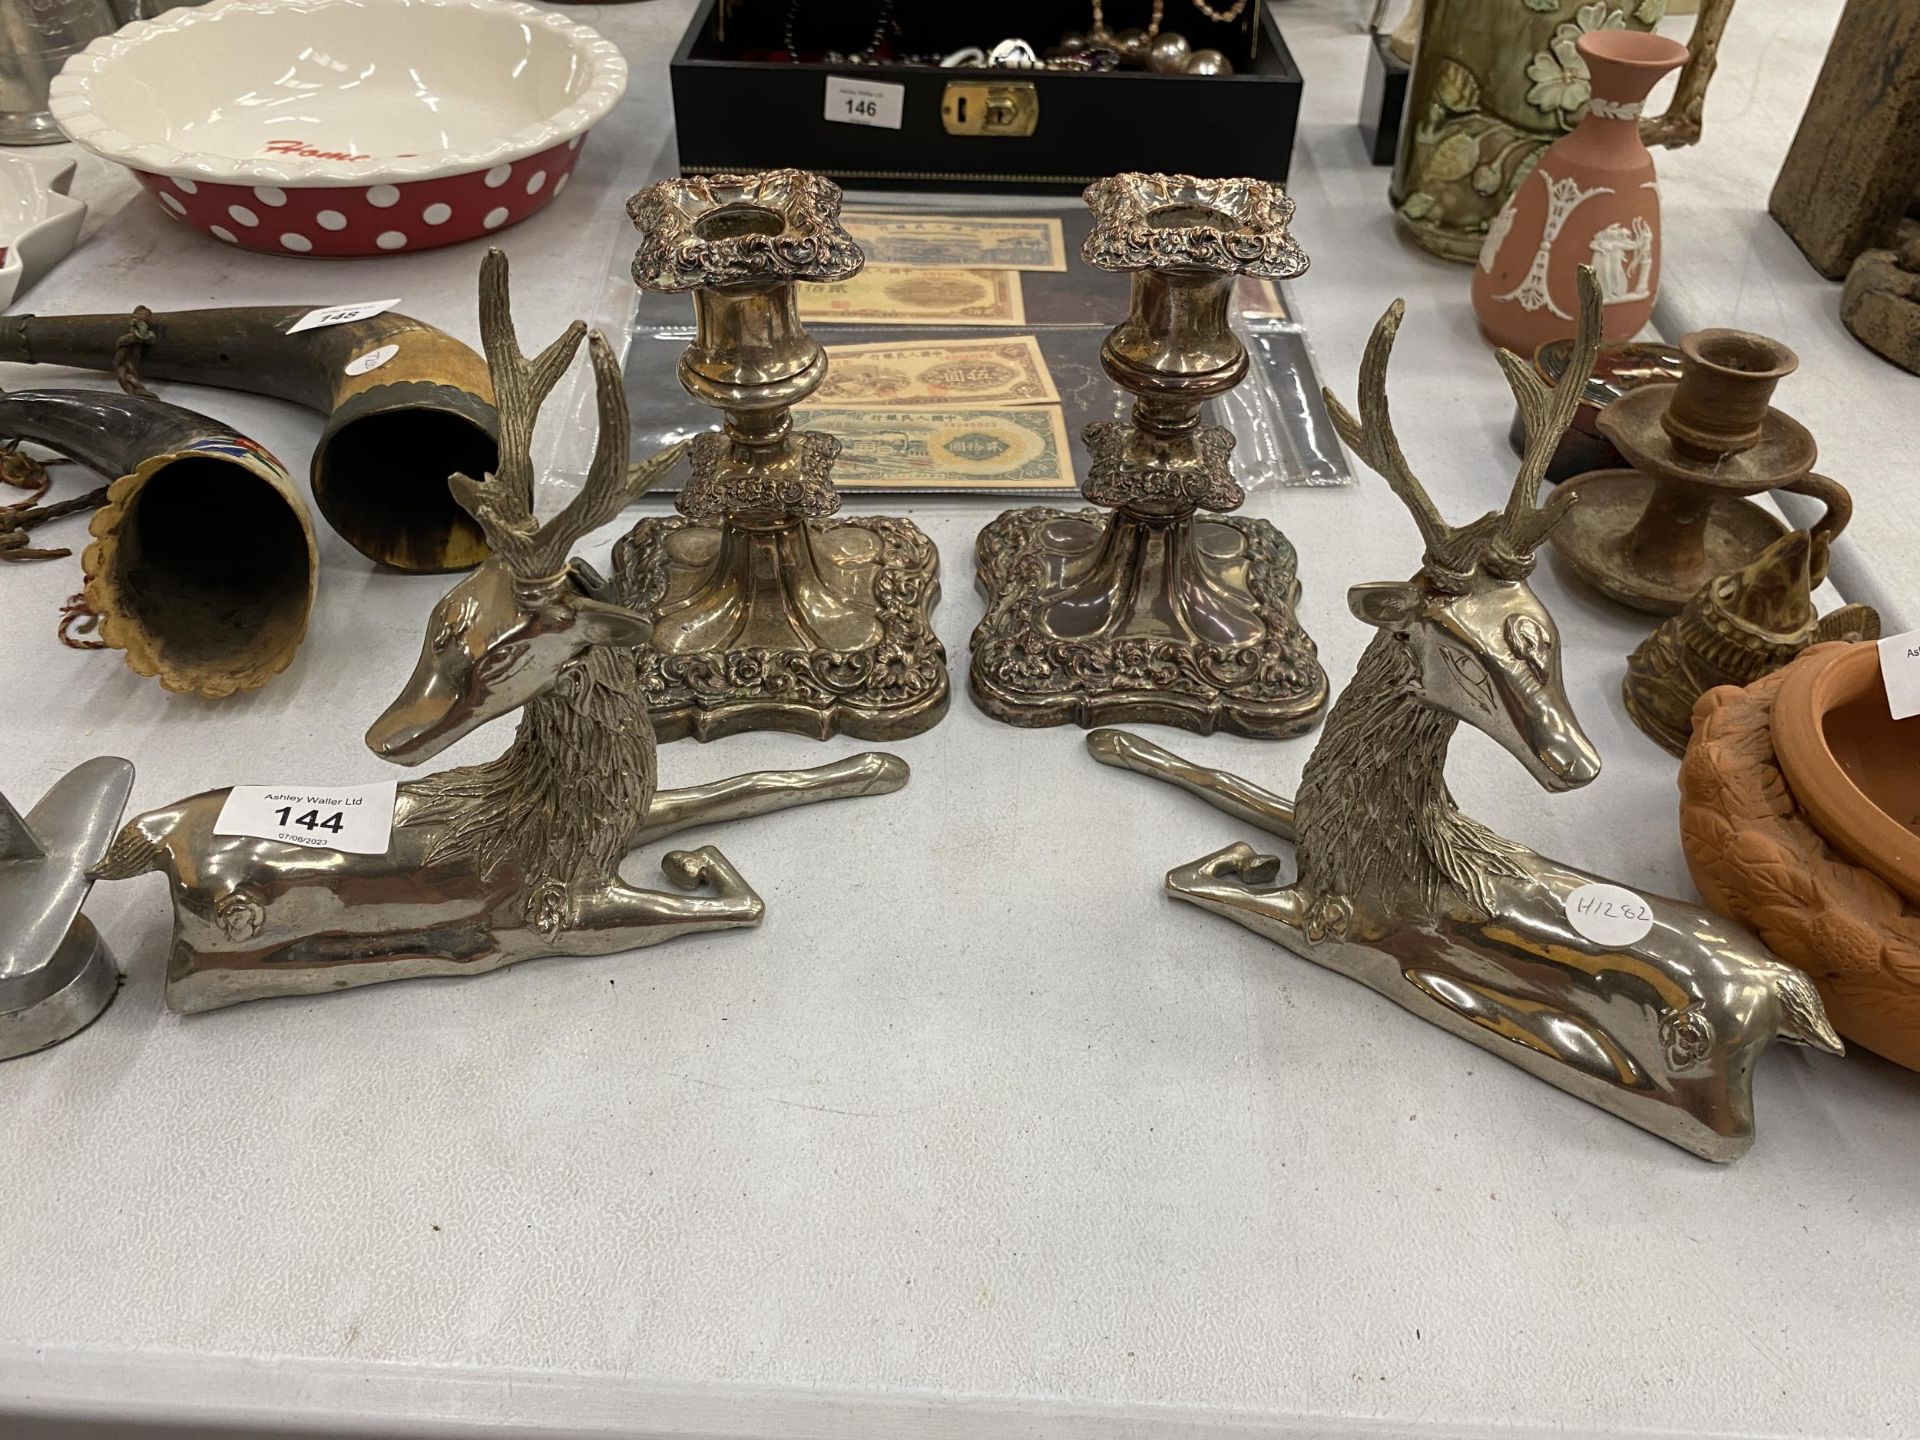 A PAIR OF HEAVY WHITE METAL STAG ORNAMENTS AND A PAIR OF PLATED CANDLESTICKS